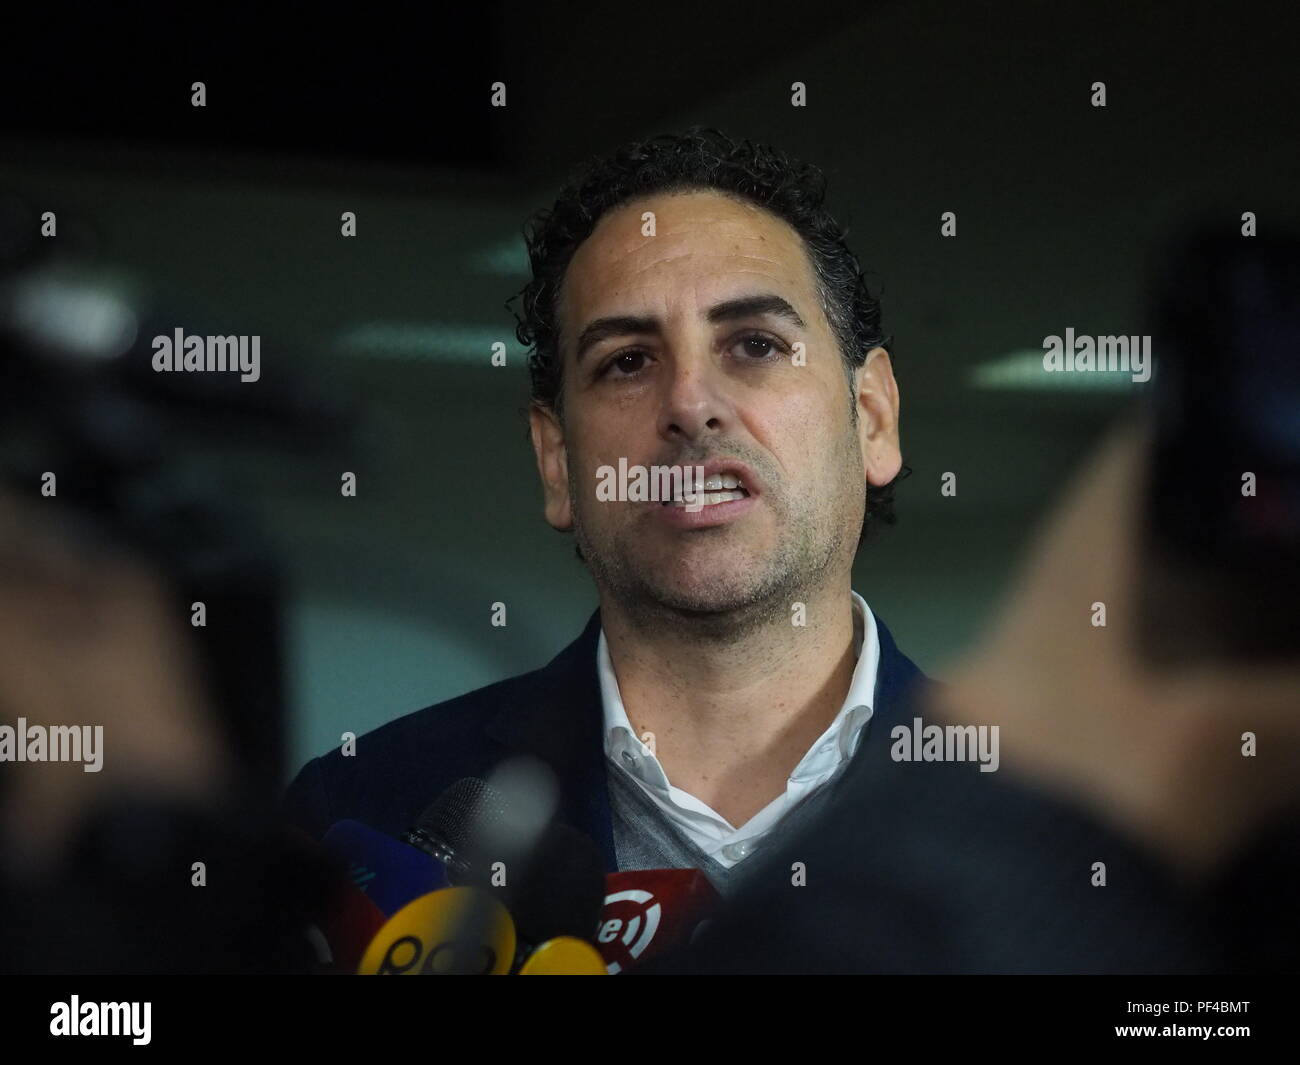 The operatic tenor Juan Diego Florez, giving a press conference and  introducing the Symphony  for Peru Orchestra,  one day before the match against Australia in the Russia 2018 World Cup. Stock Photo